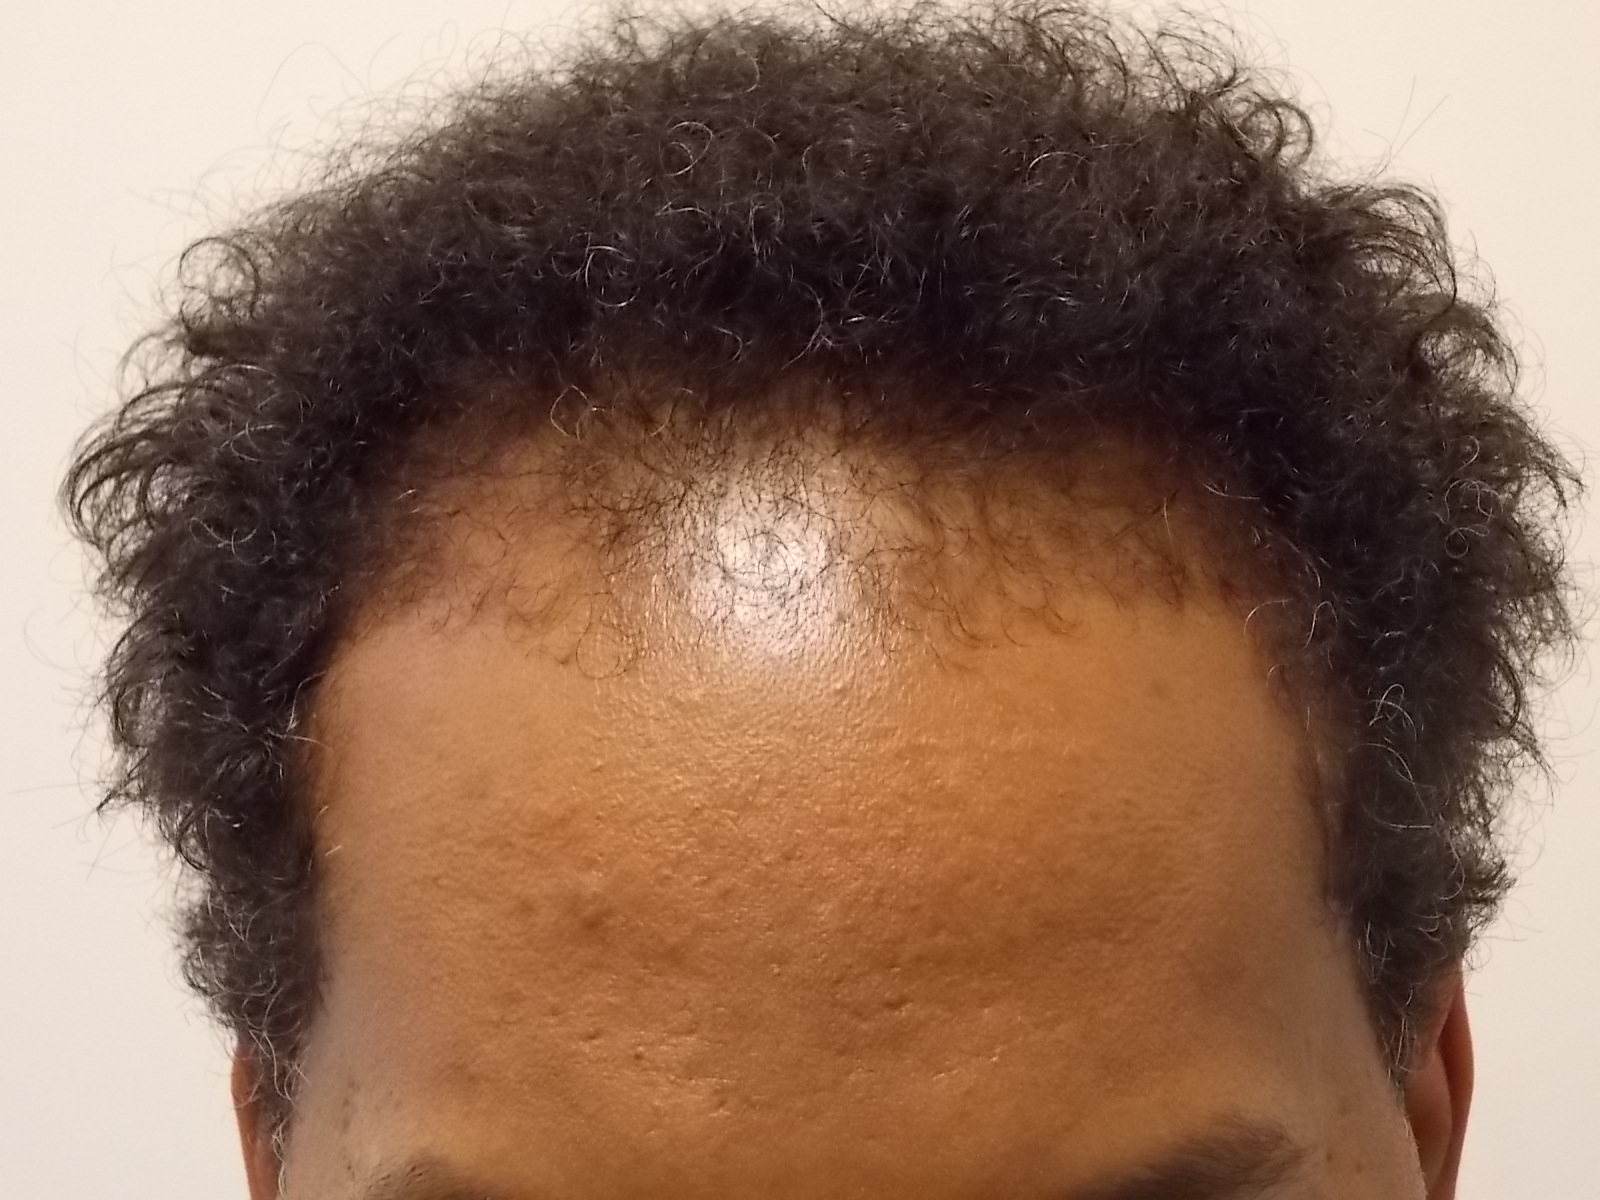 Forehead before surgery